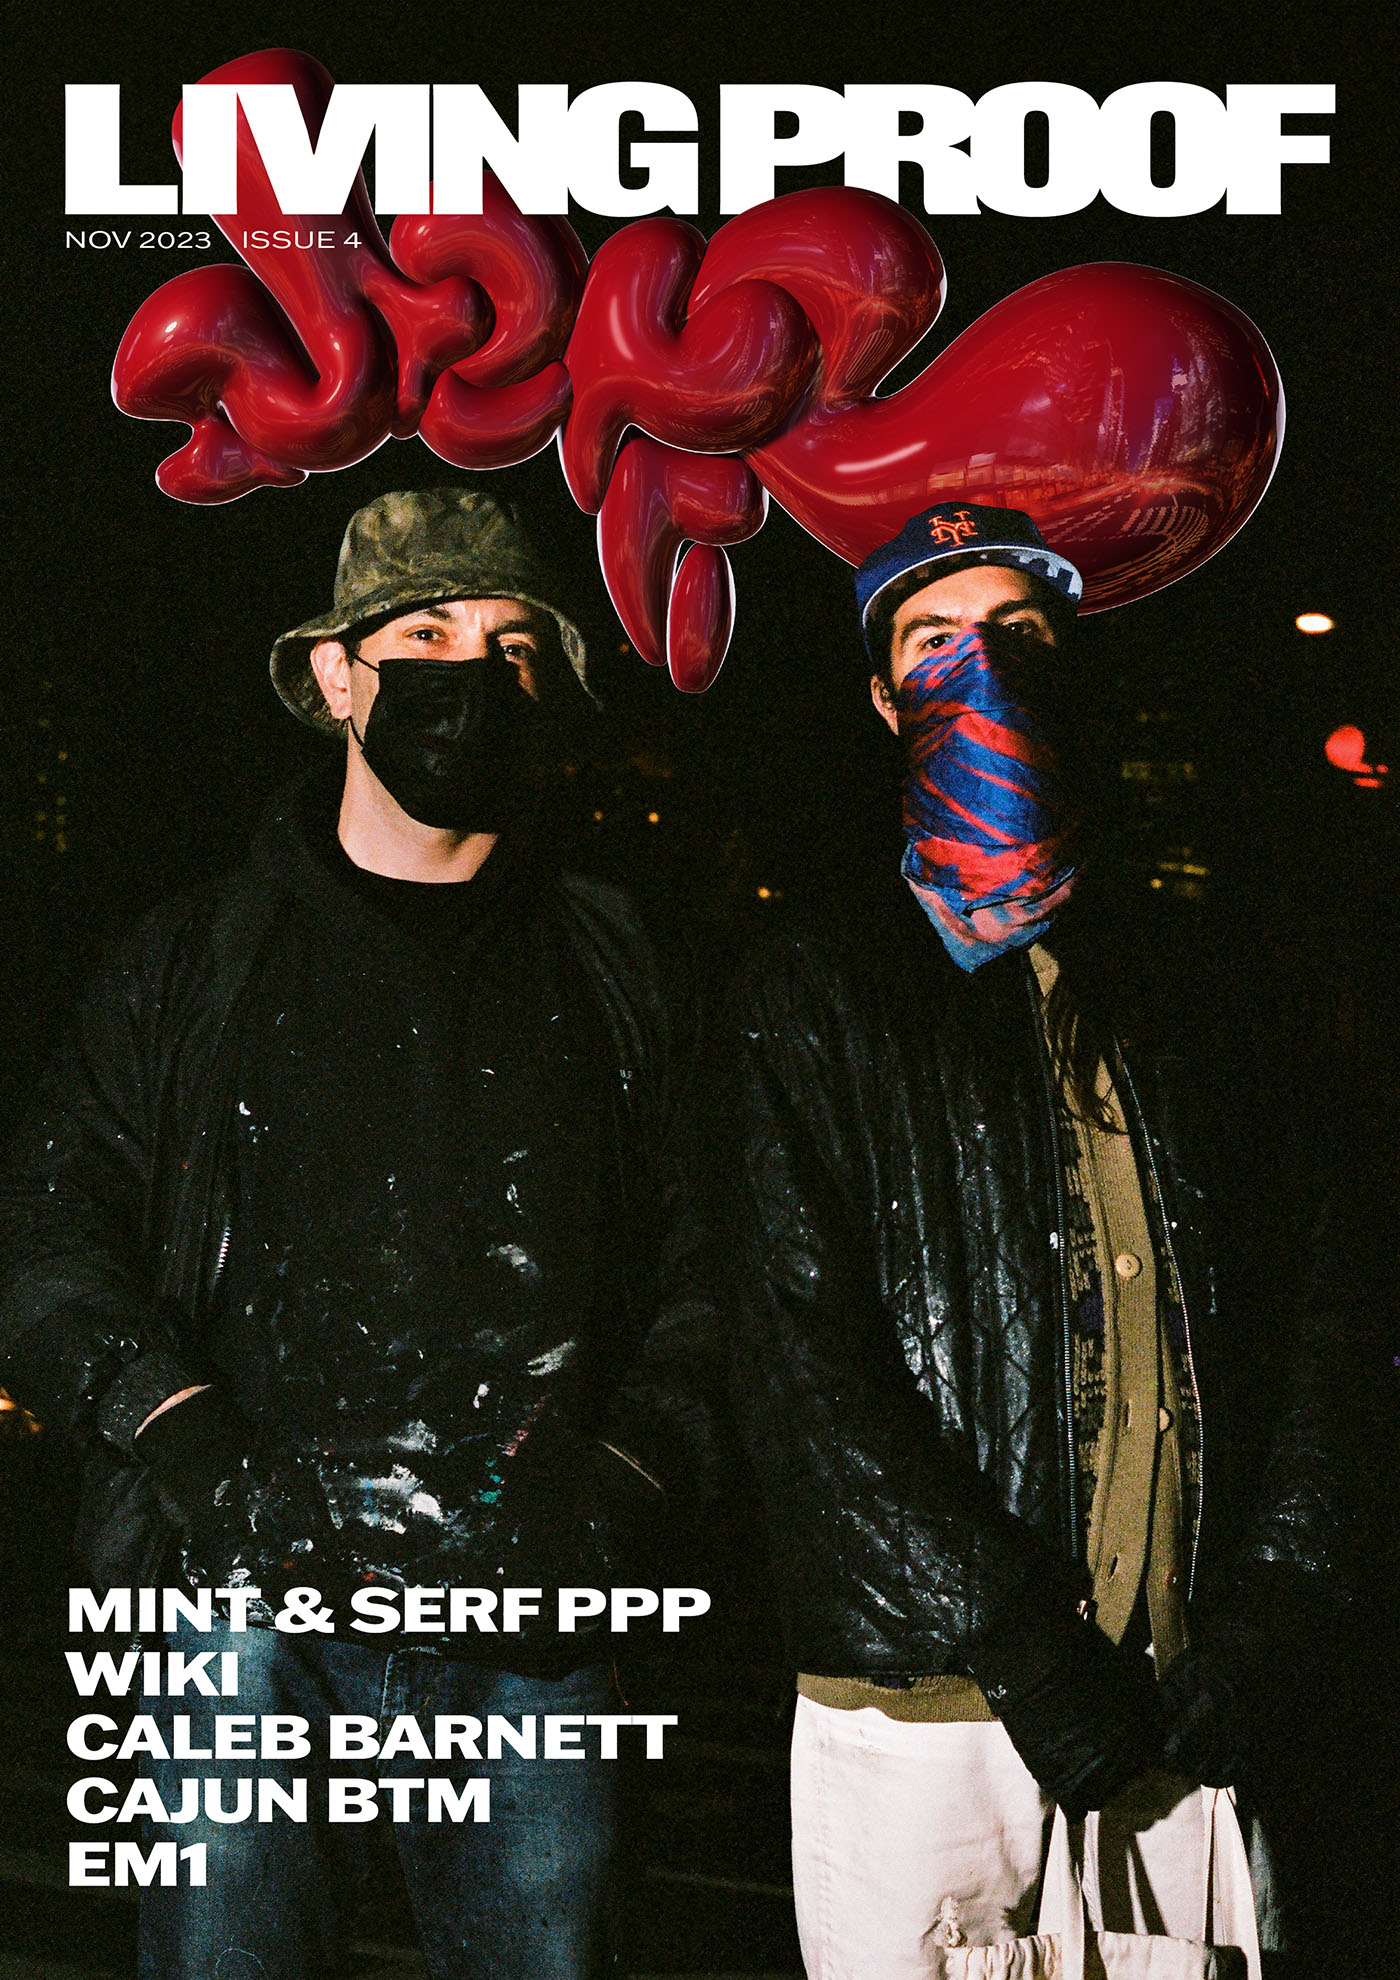 Living Proof Magazine Issue Four featuring Mint & Serf PPP, WIKI, Caleb Barnett, Cajun BTM, and EM1.